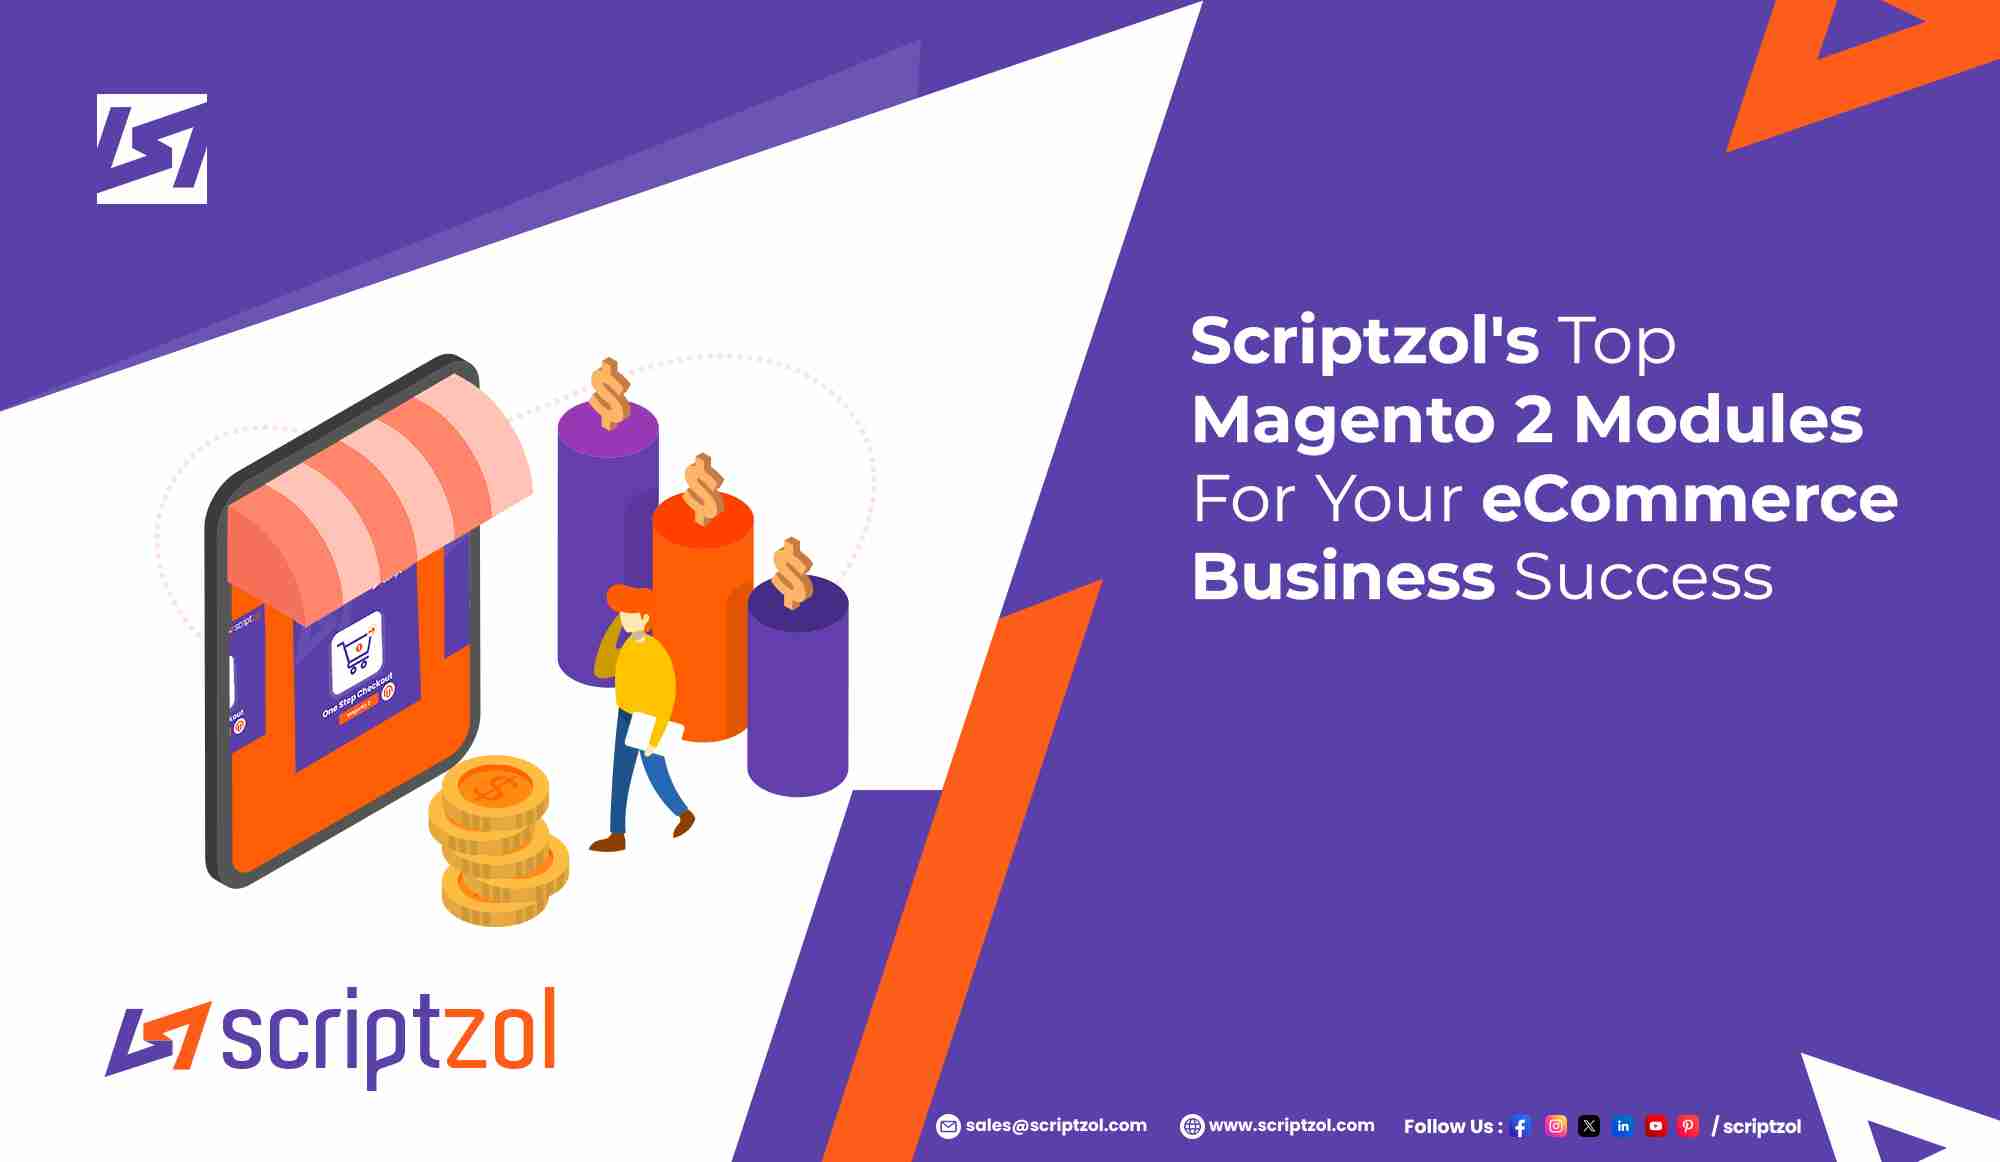 Scriptzol’s Top Magento 2 Modules For Your eCommerce Business Success